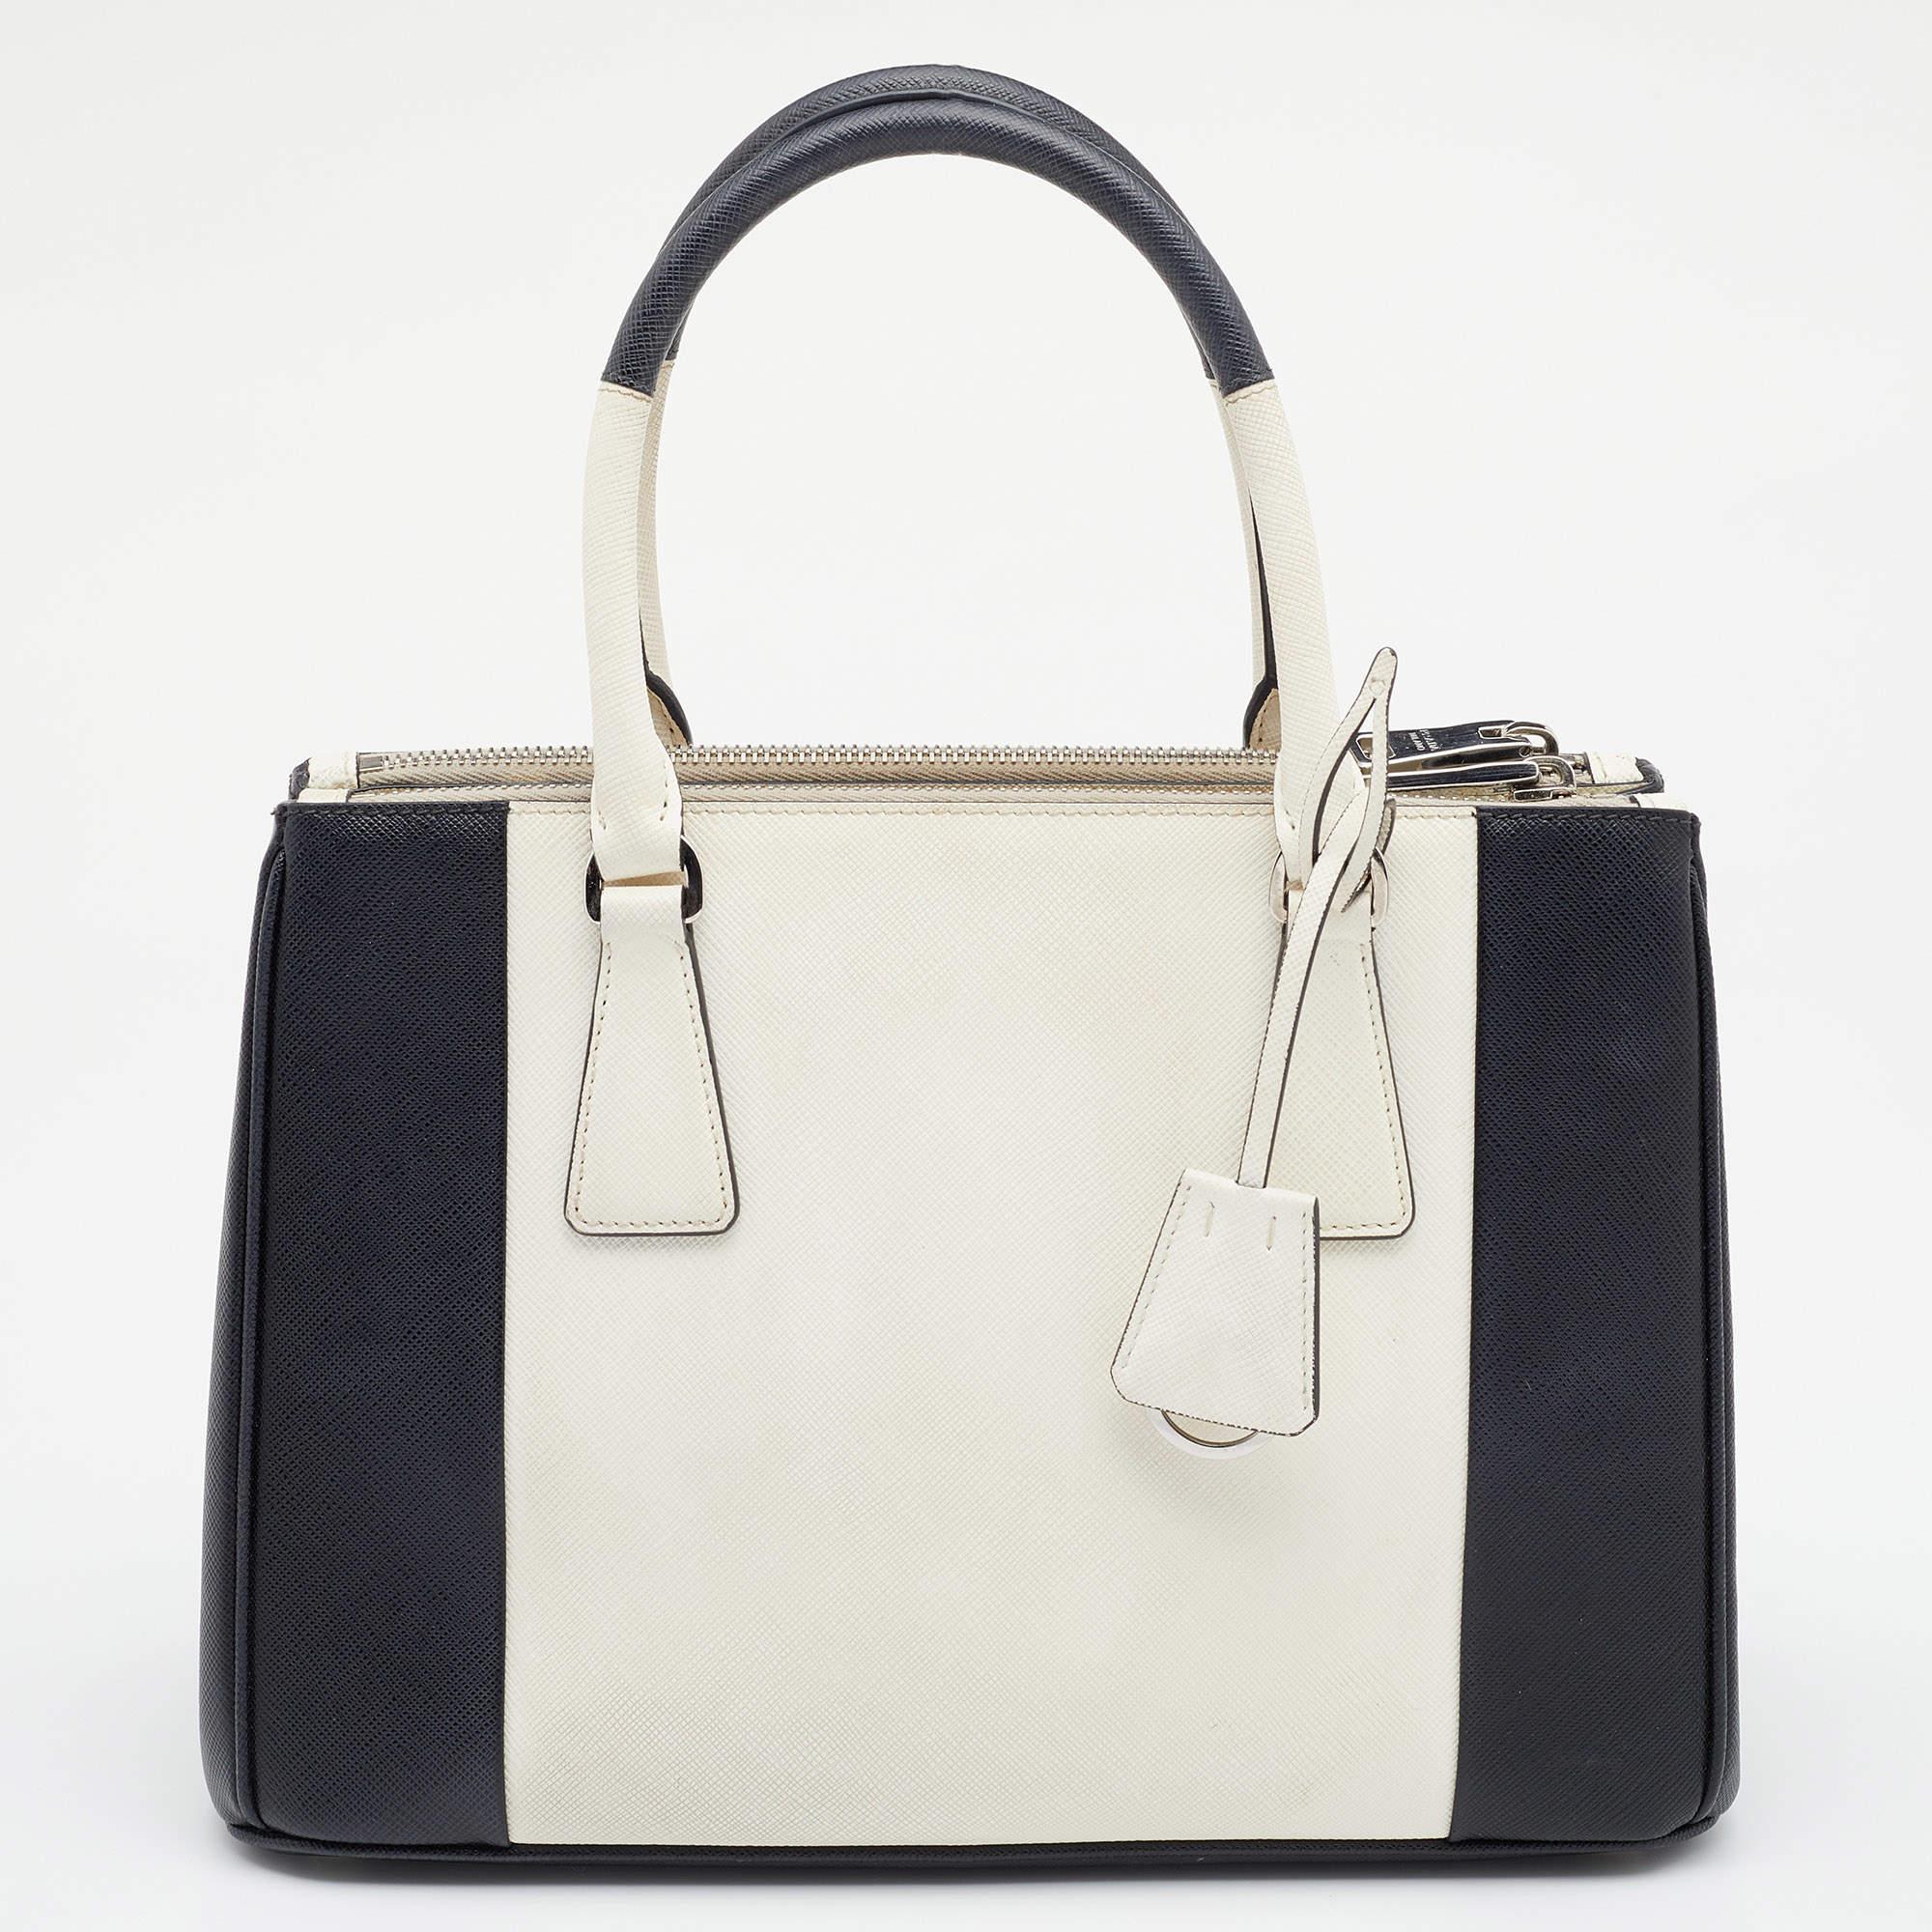 This Double Zip tote by Prada will be a loved addition to your closet. It has been crafted from Saffiano Lux leather and styled with gold-tone hardware and dual shades. It comes with two top handles, two zip compartments, and a perfectly-sized main